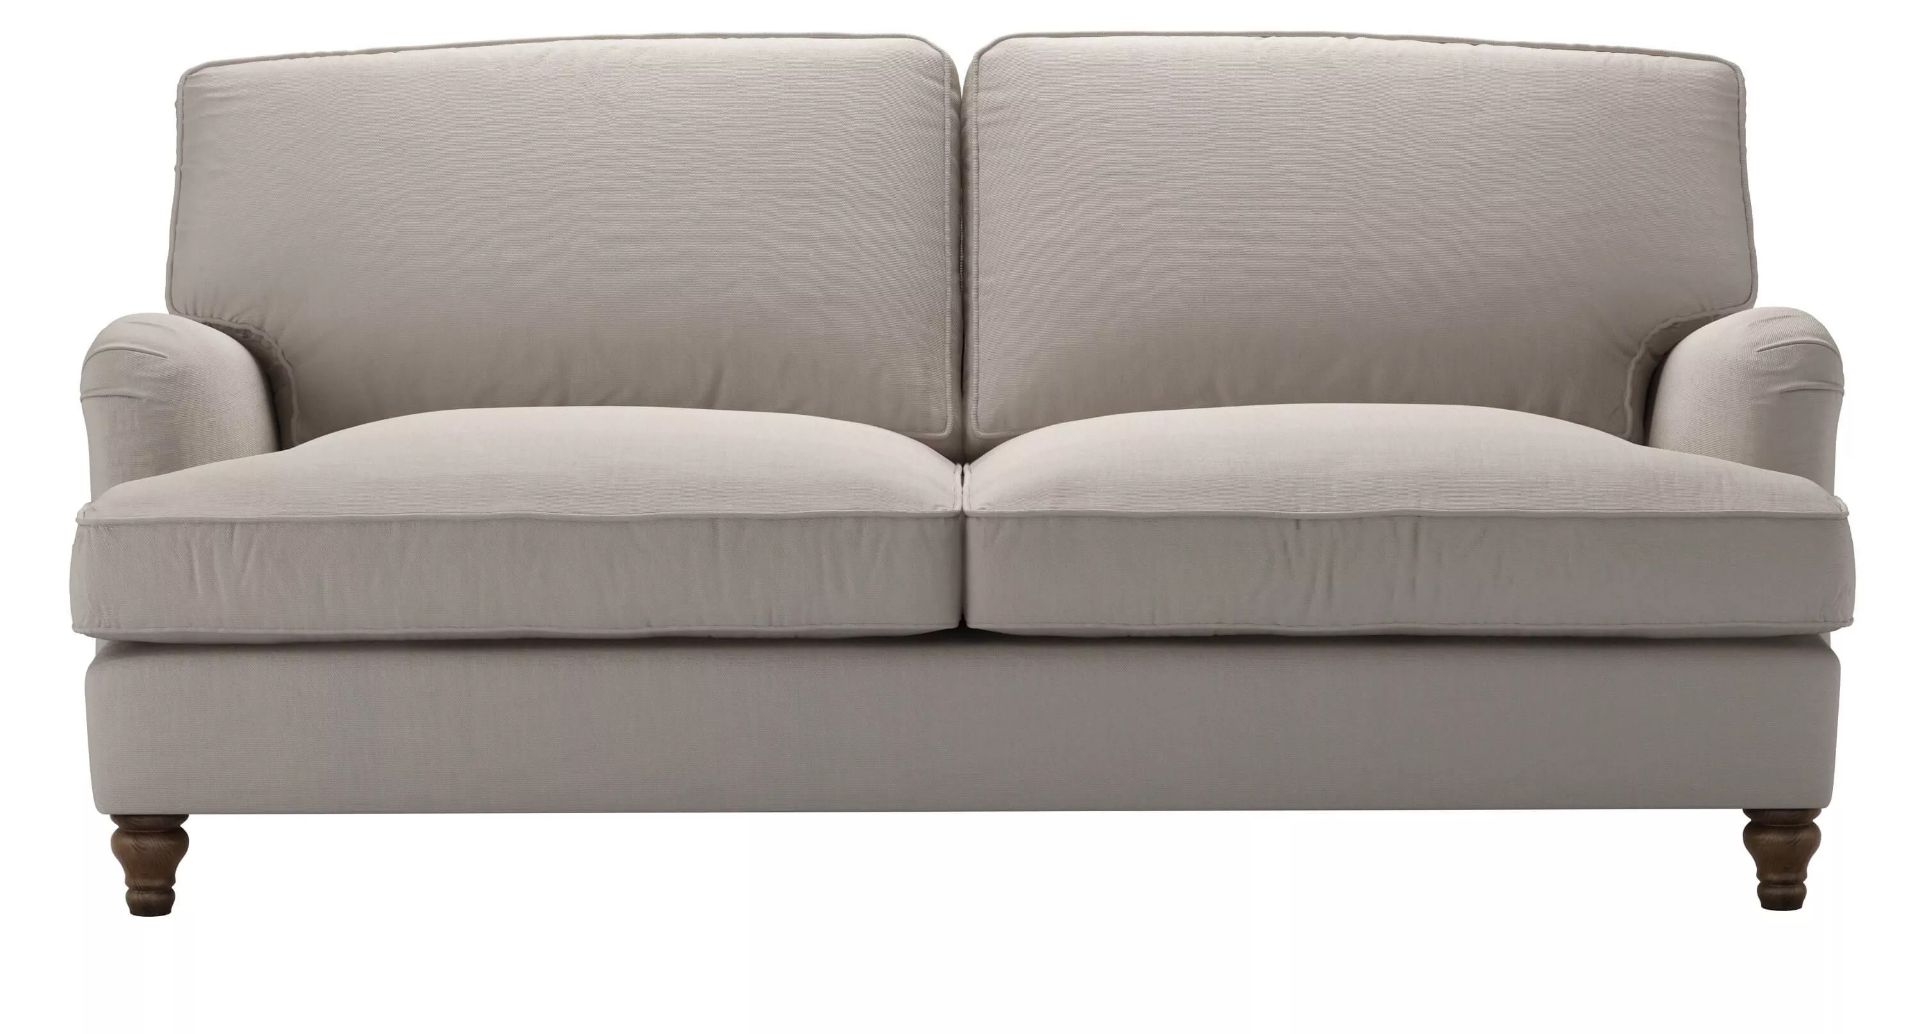 Bluebell 3 Seat Sofa Bed In Stone Brushed Linen Cotton RRP - £2620